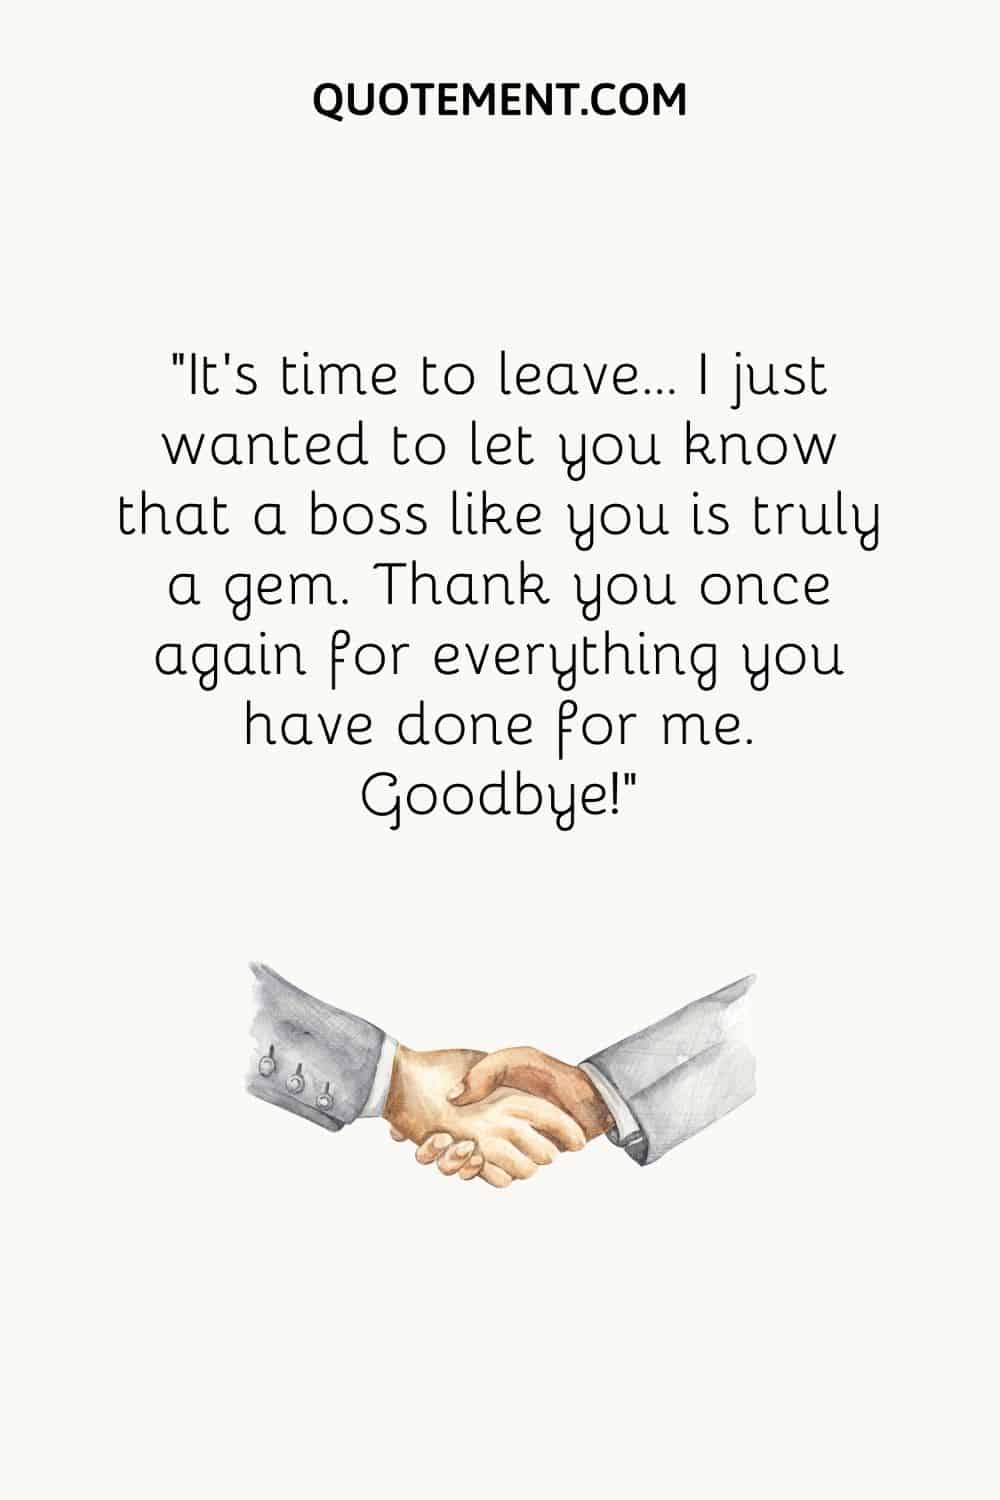 It’s time to leave... I just wanted to let you know that a boss like you is truly a gem. Thank you once again for everything you have done for me. Goodbye!